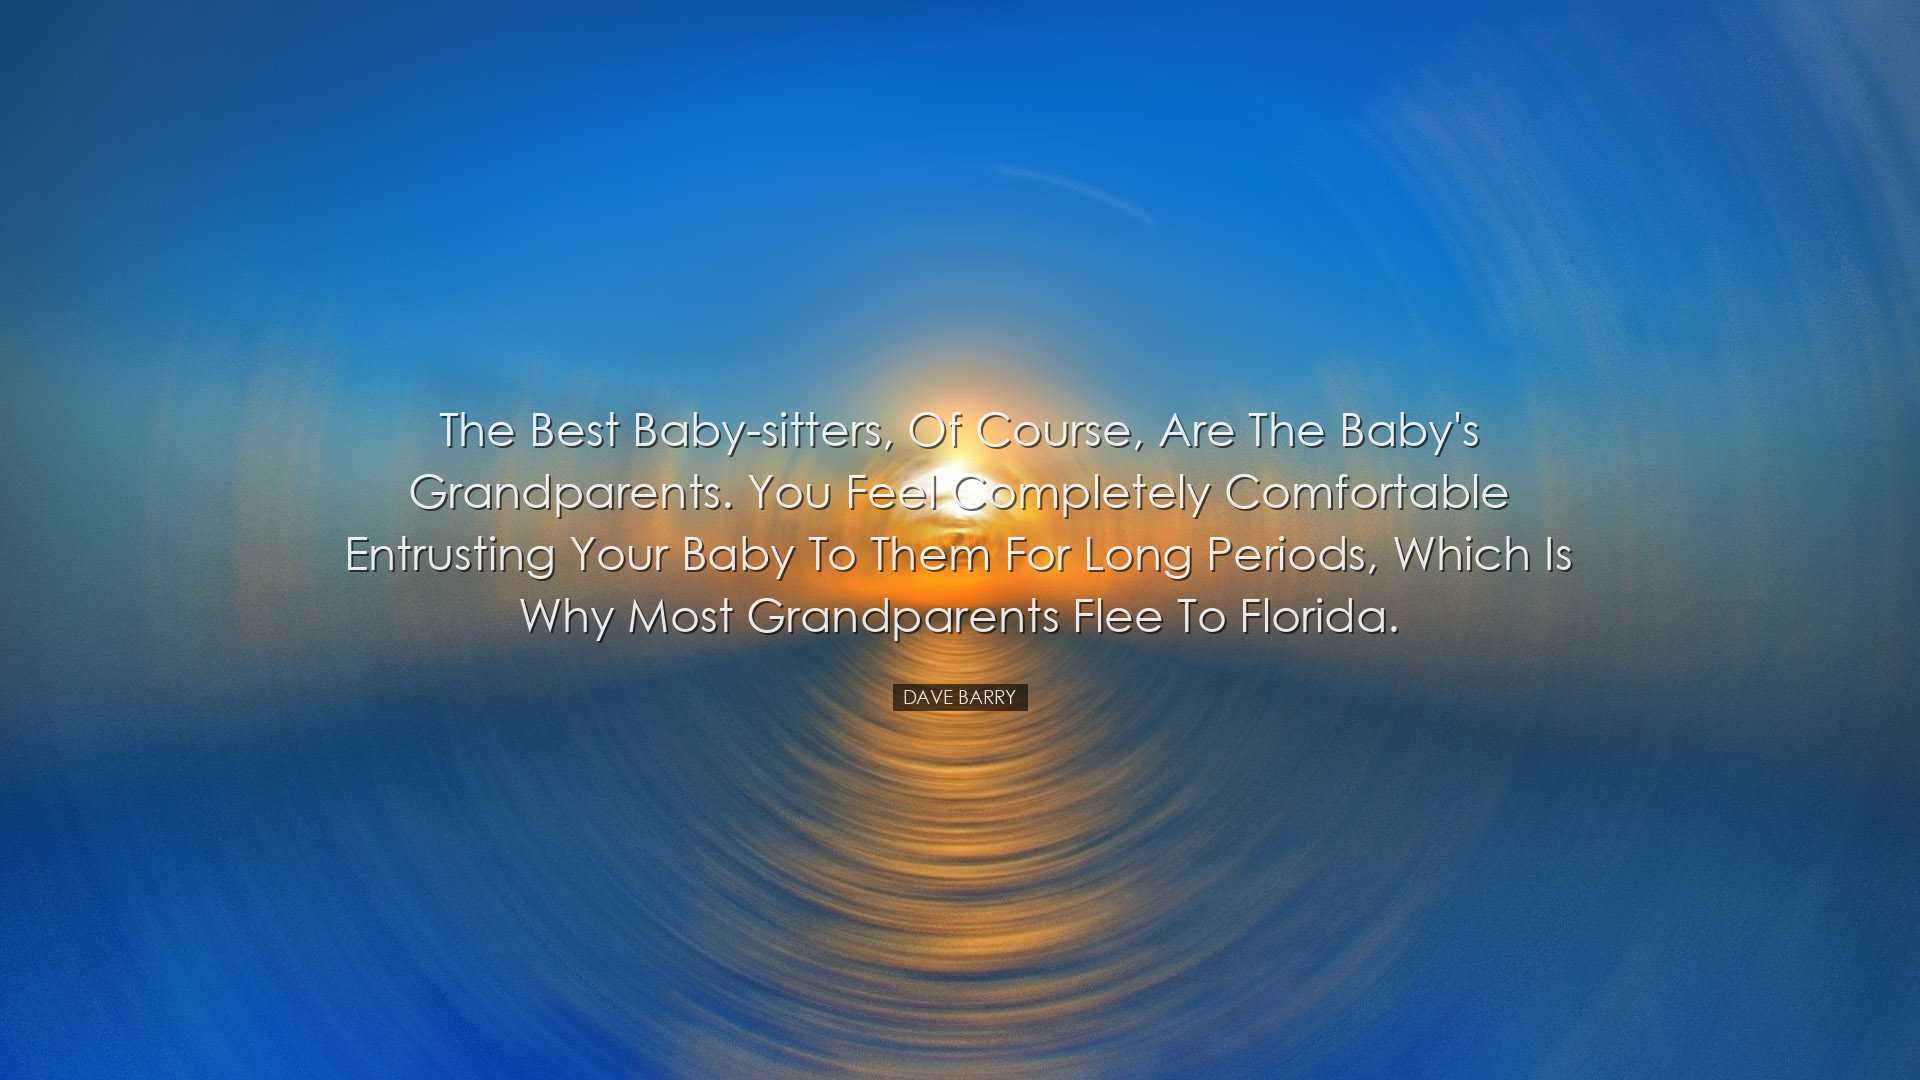 The best baby-sitters, of course, are the baby's grandparents. You